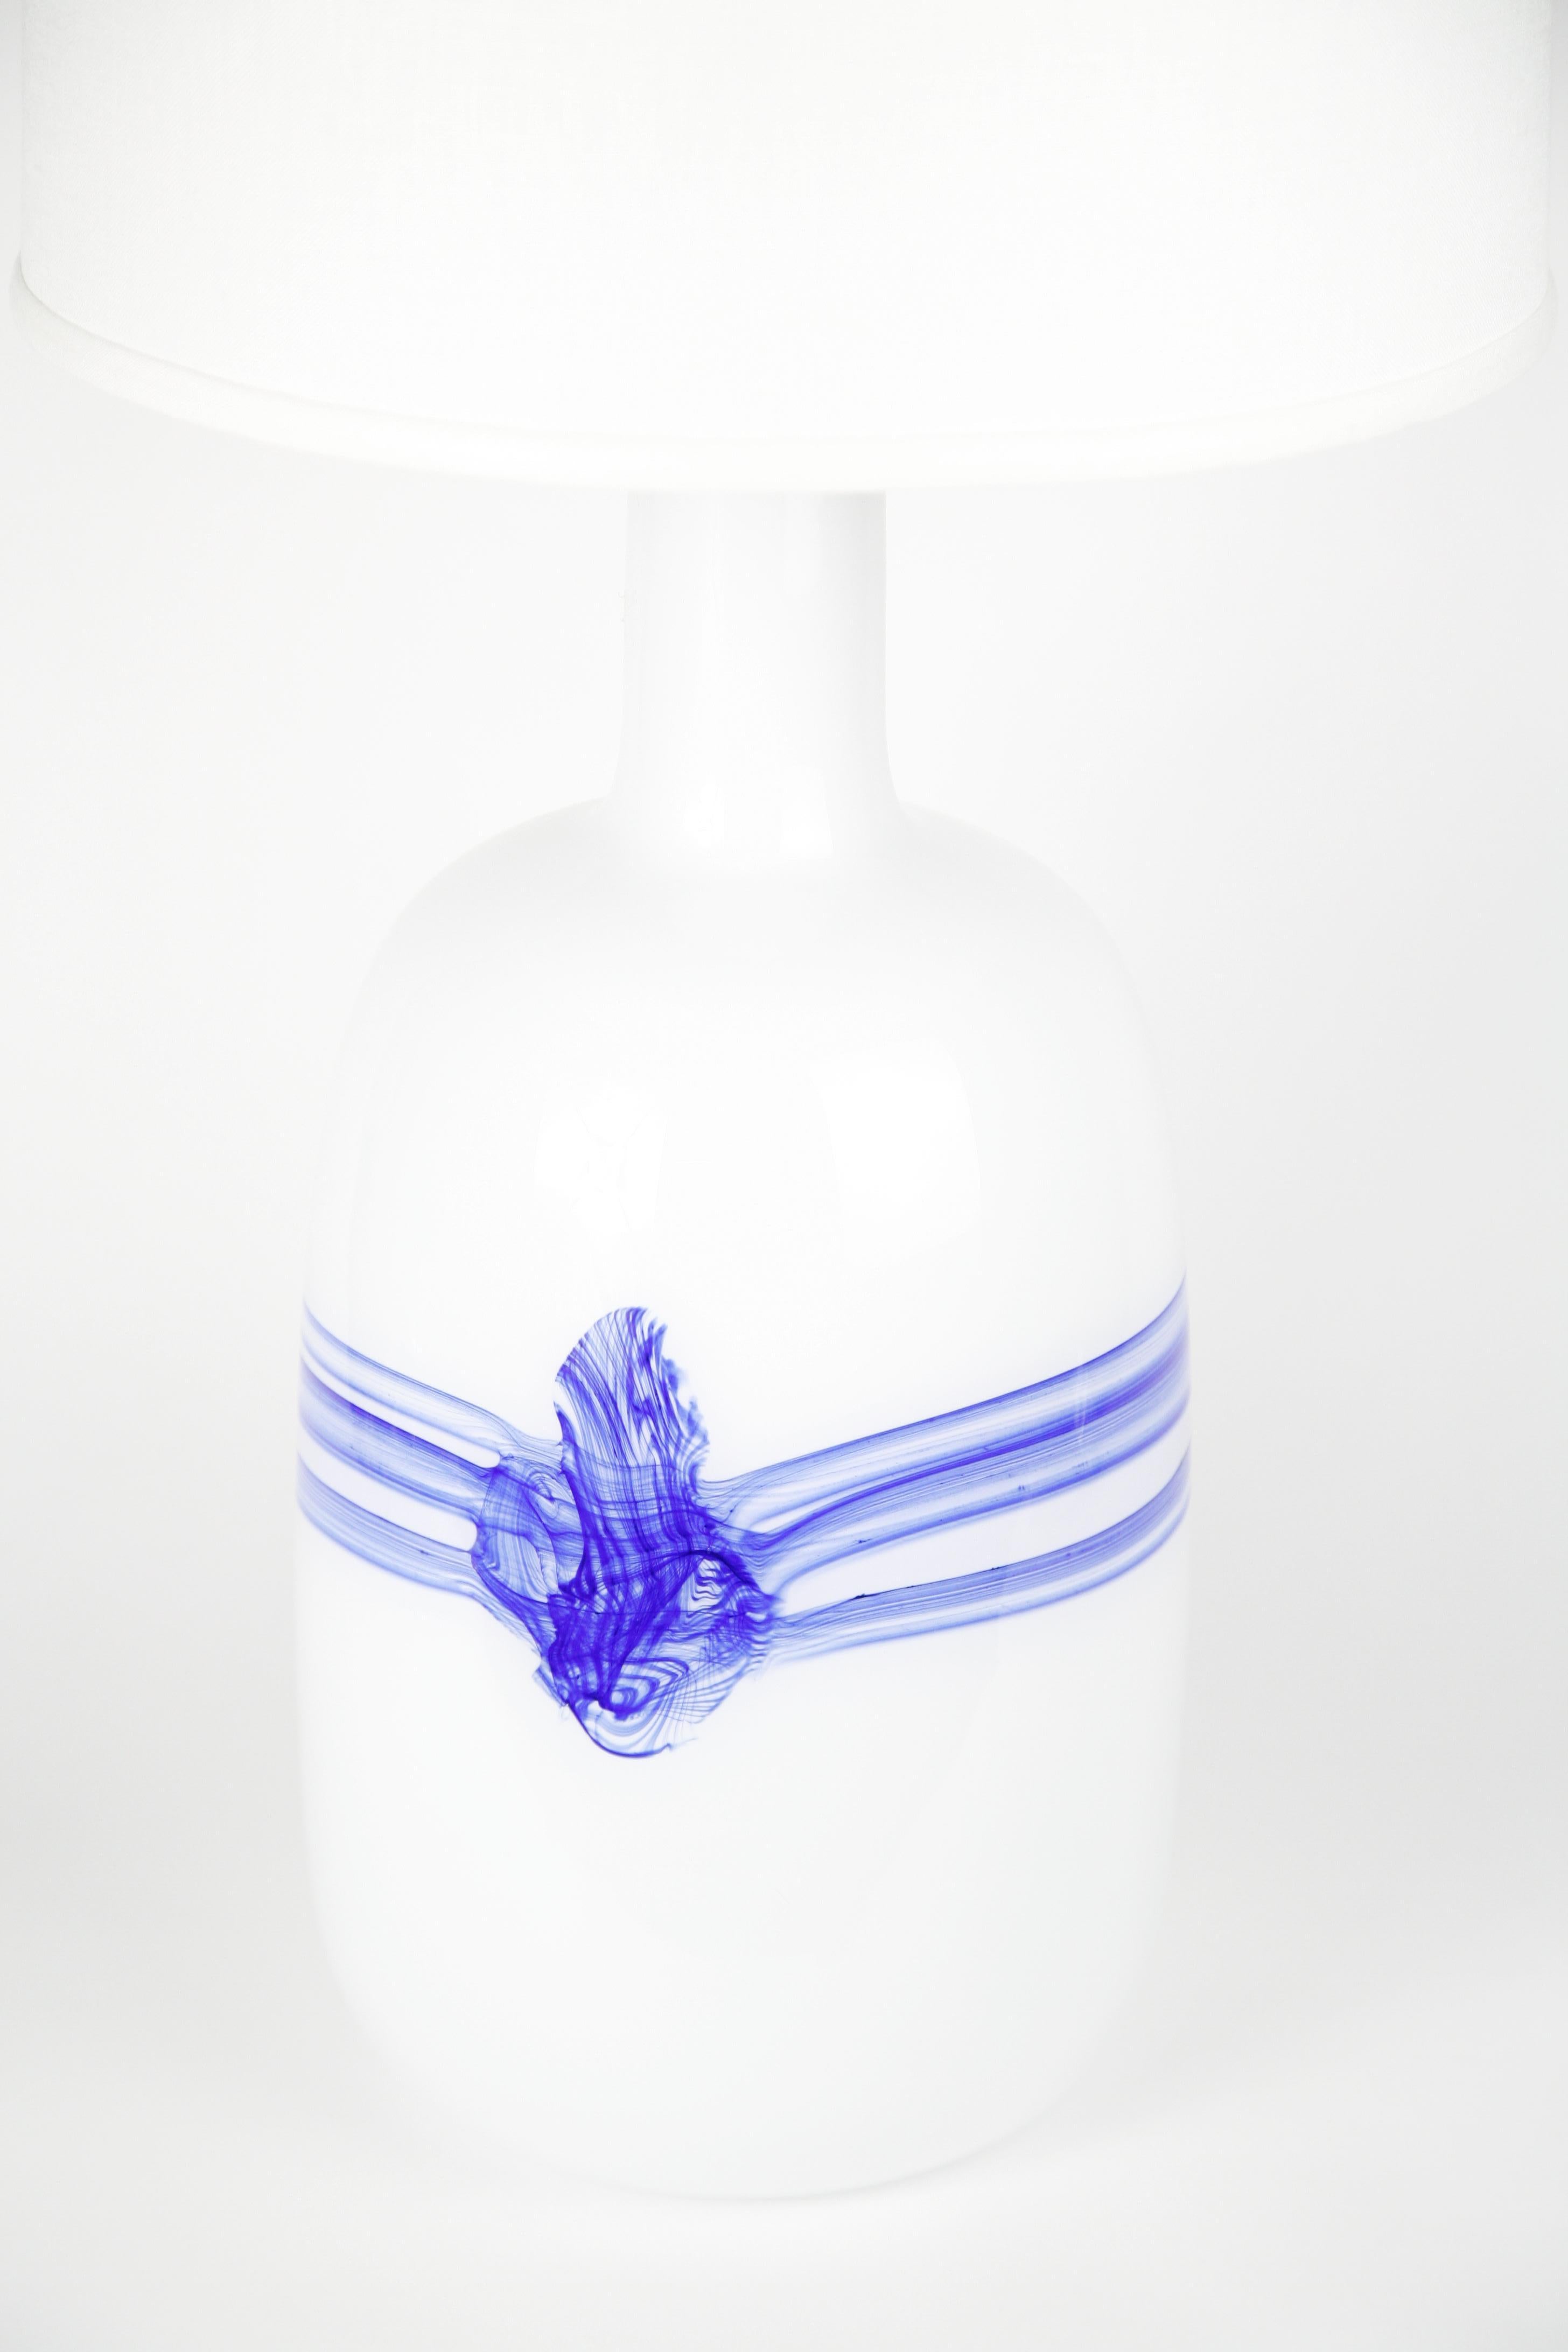 Large and impressive Holmegaard opaline glass lamp designed by Michael Bang made by the Danish glass manufacturer Holmegaard in 1980, white glass partly royal blue glass with polished steel fitting a rarely seen model and size excellent